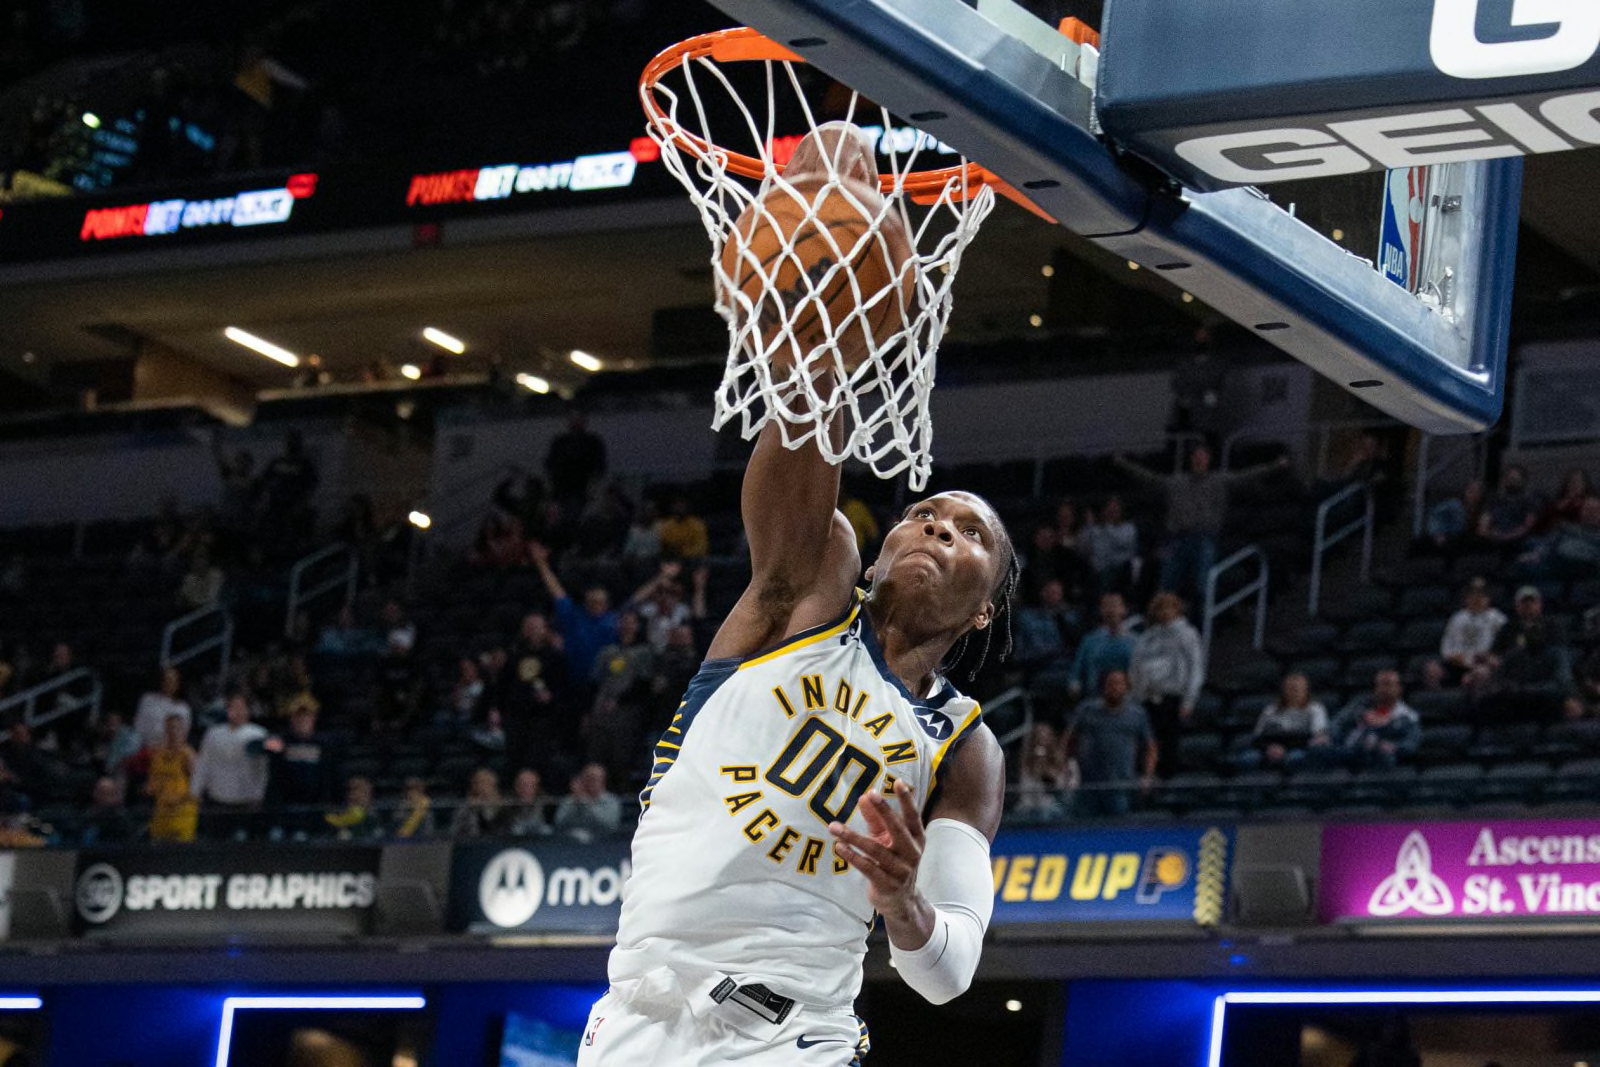 Indiana Pacers 3 biggest takeaways from win over the New York Knicks